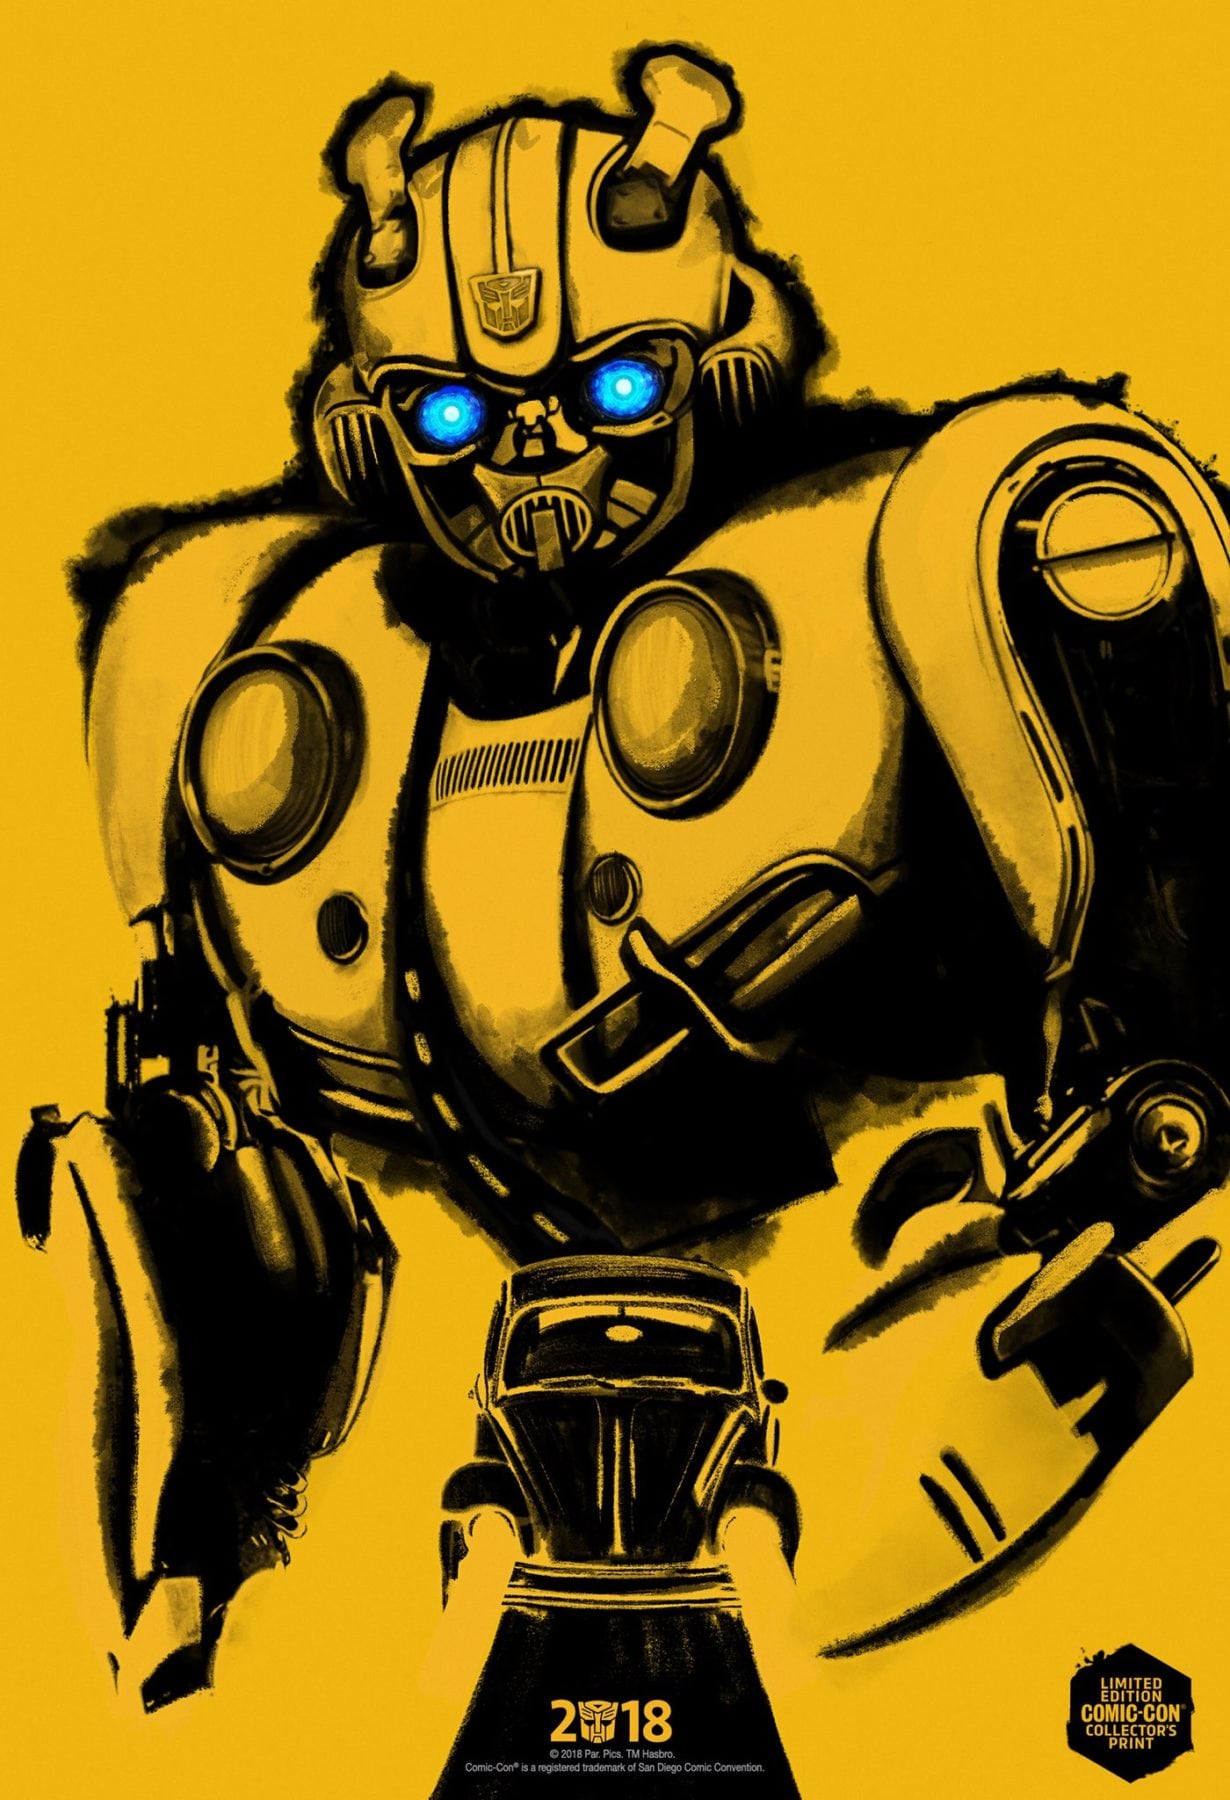 Transformers spinoff Bumblebee gets a ComicCon poster and cast interviews